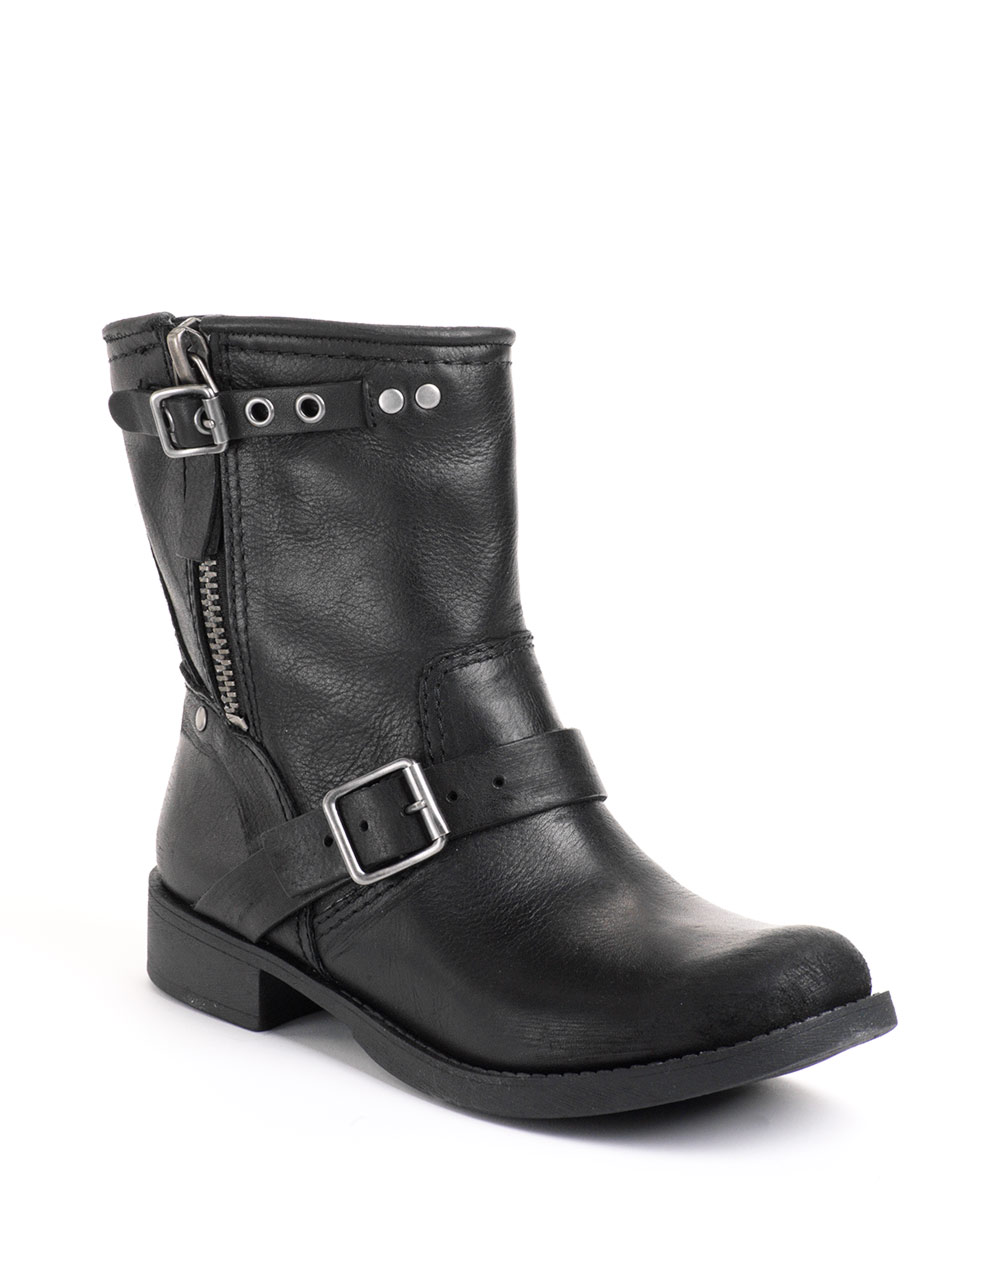 Nine West Runway Relief Leather Ankle Boots in Black le (Black) - Lyst